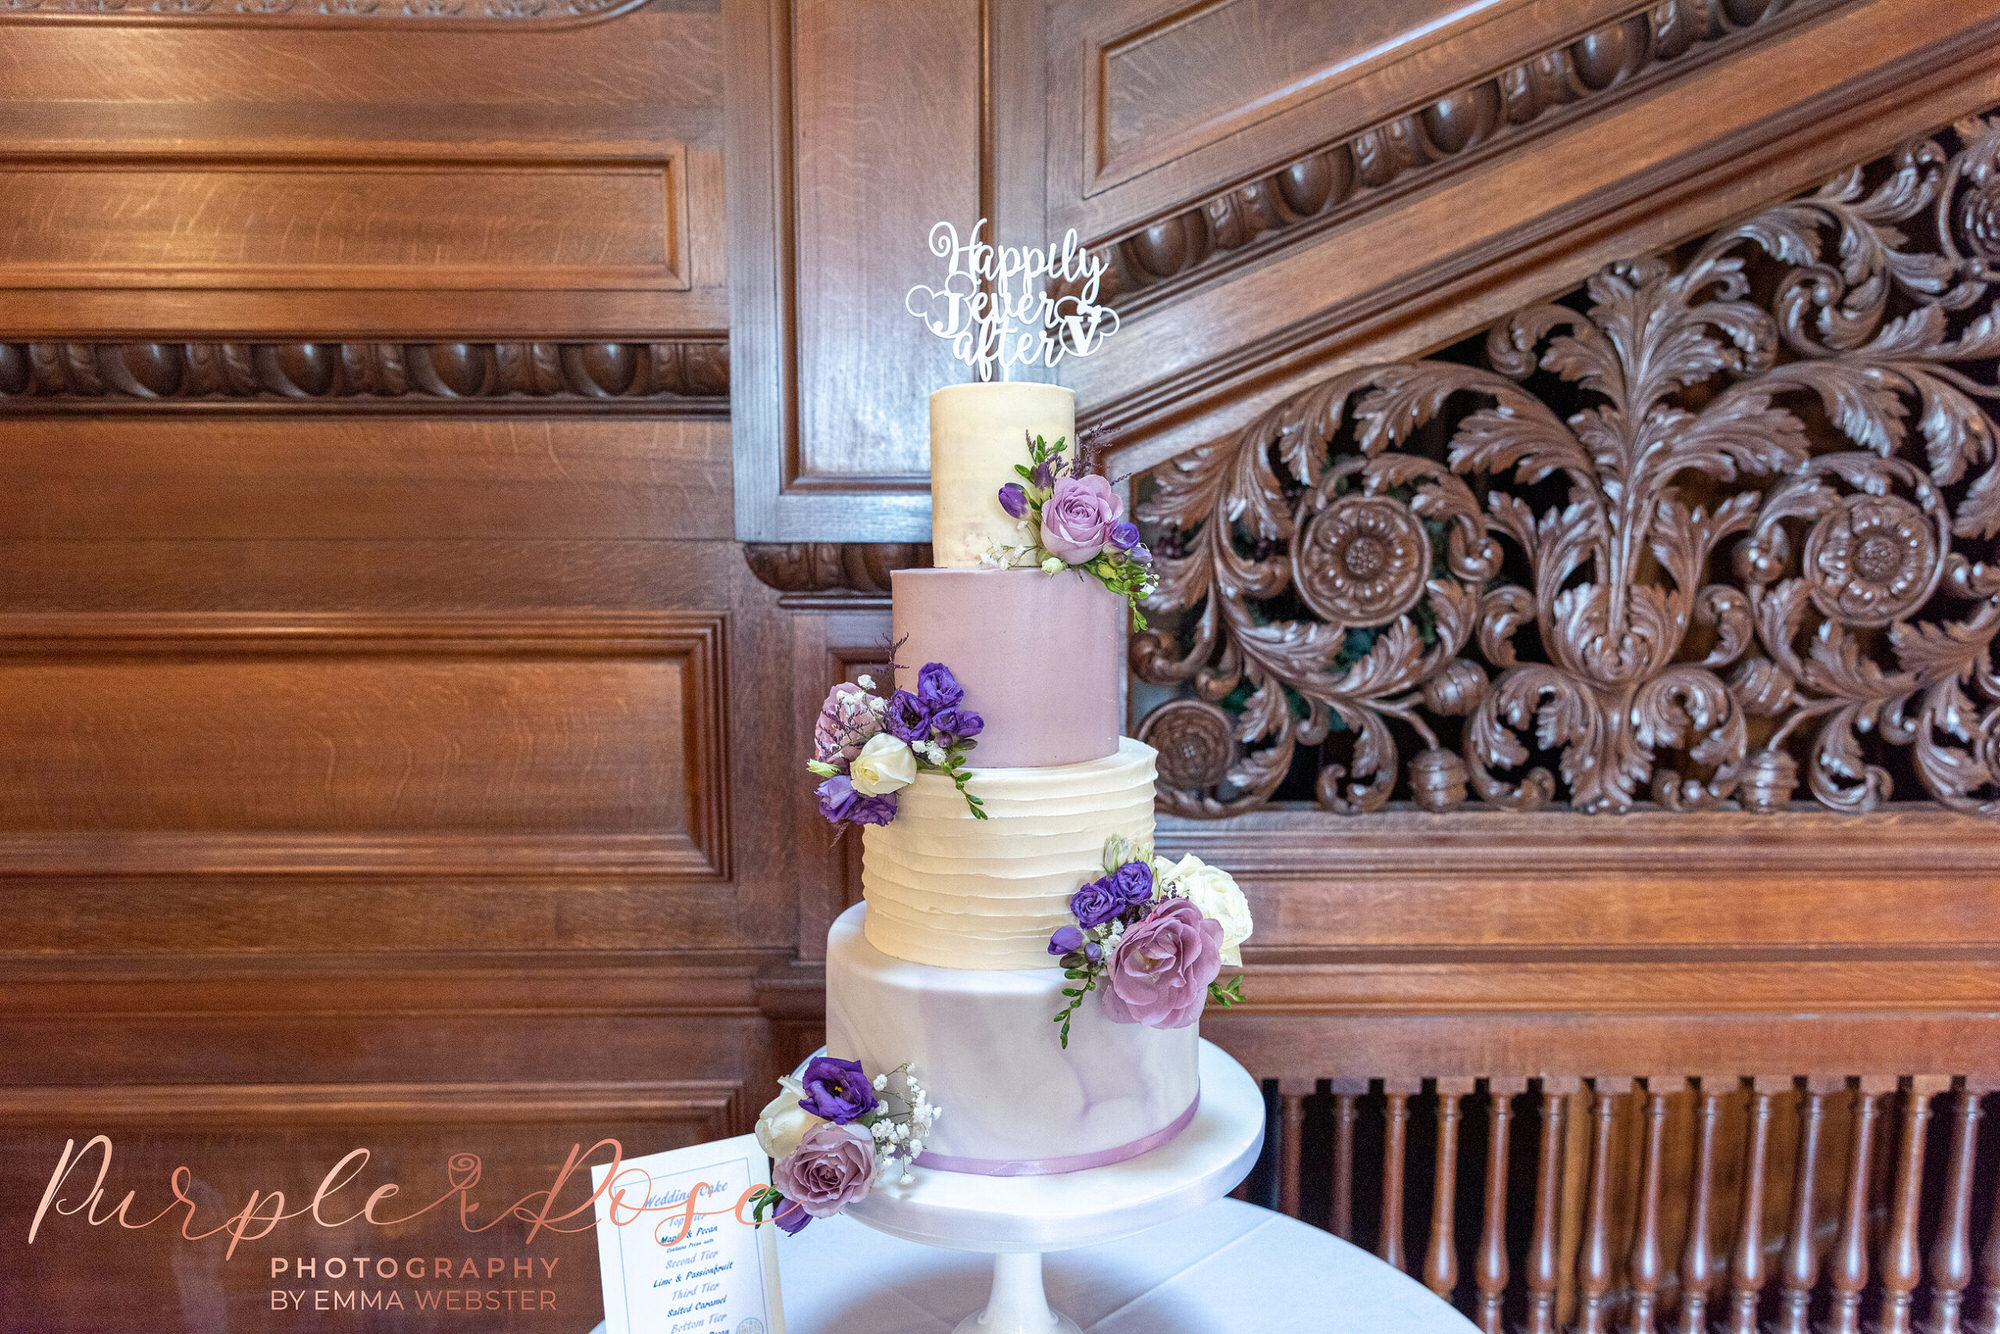 Purple and white wedding cake decorated with flowers